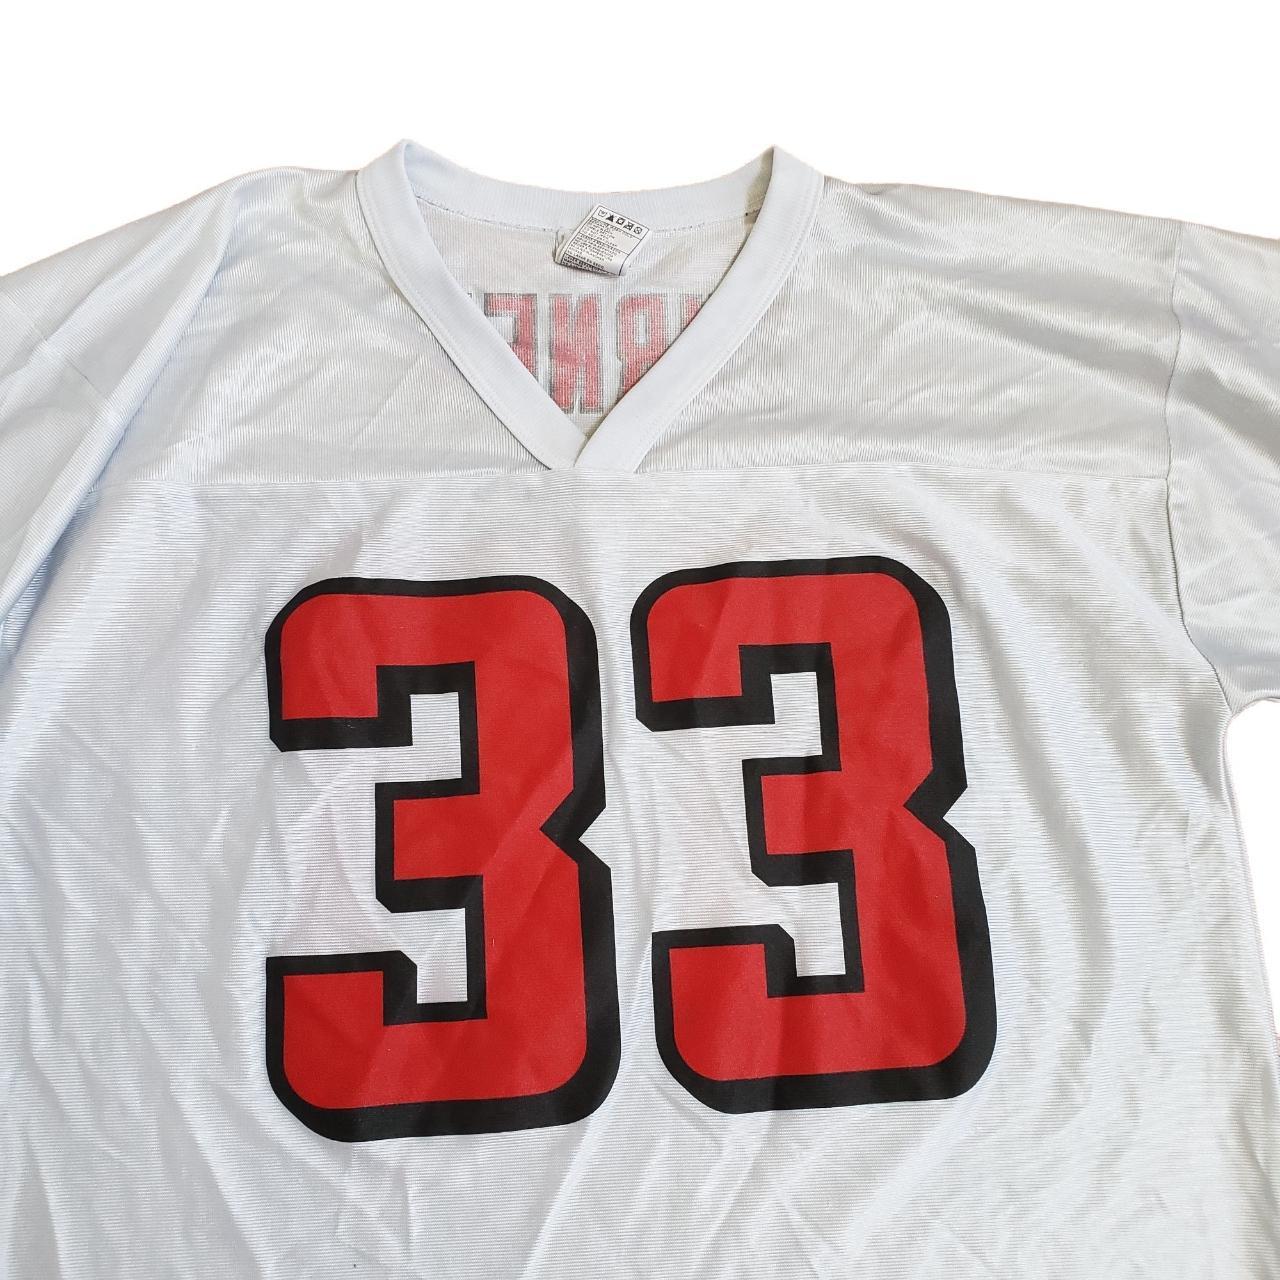 Product Image 4 - NFL. White jersey with red